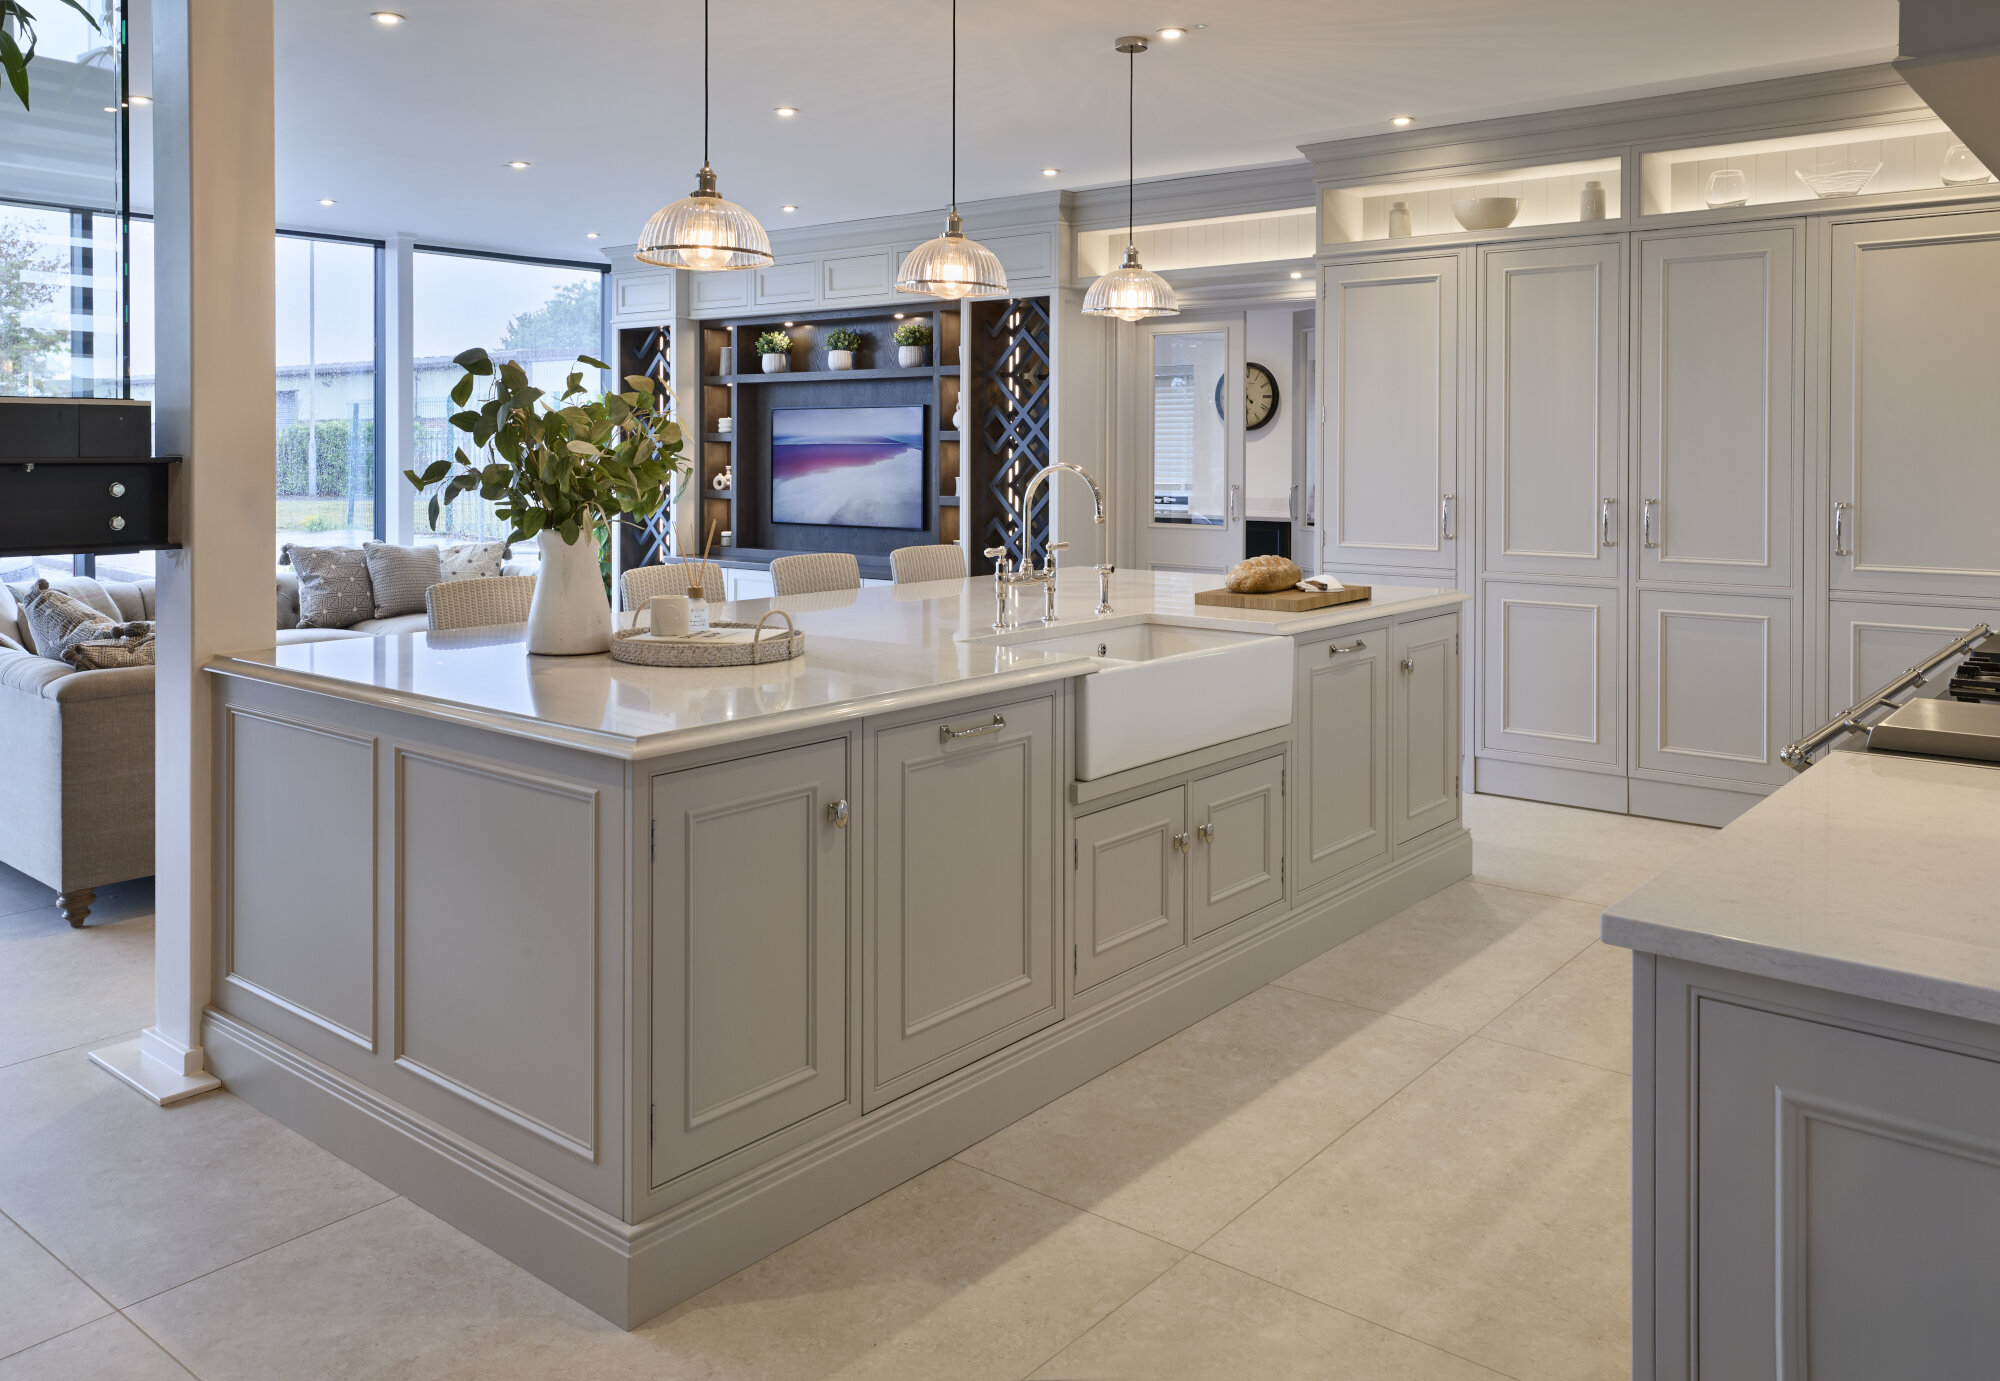 This Bespoke Kitchen Design is on display in our showroom near Bolsover